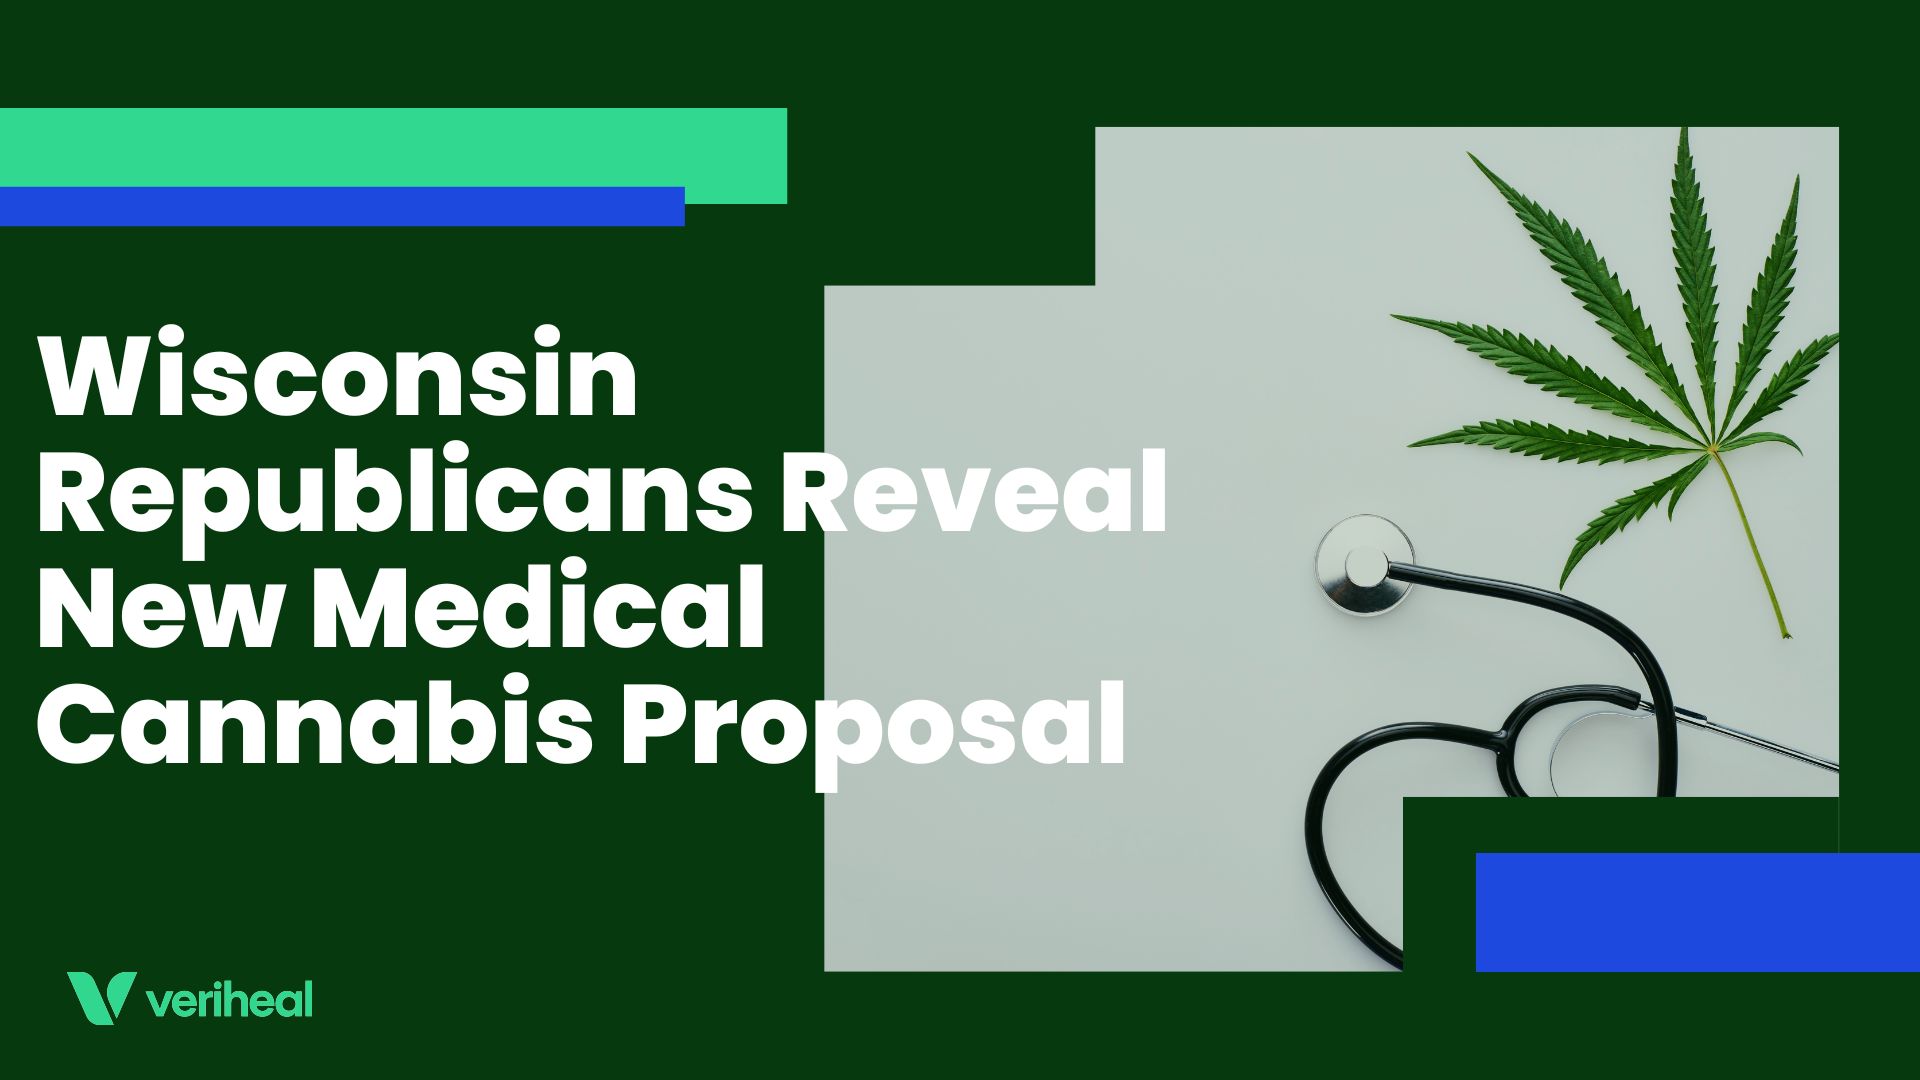 Wisconsin Republicans Reveal New Medical Cannabis Proposal